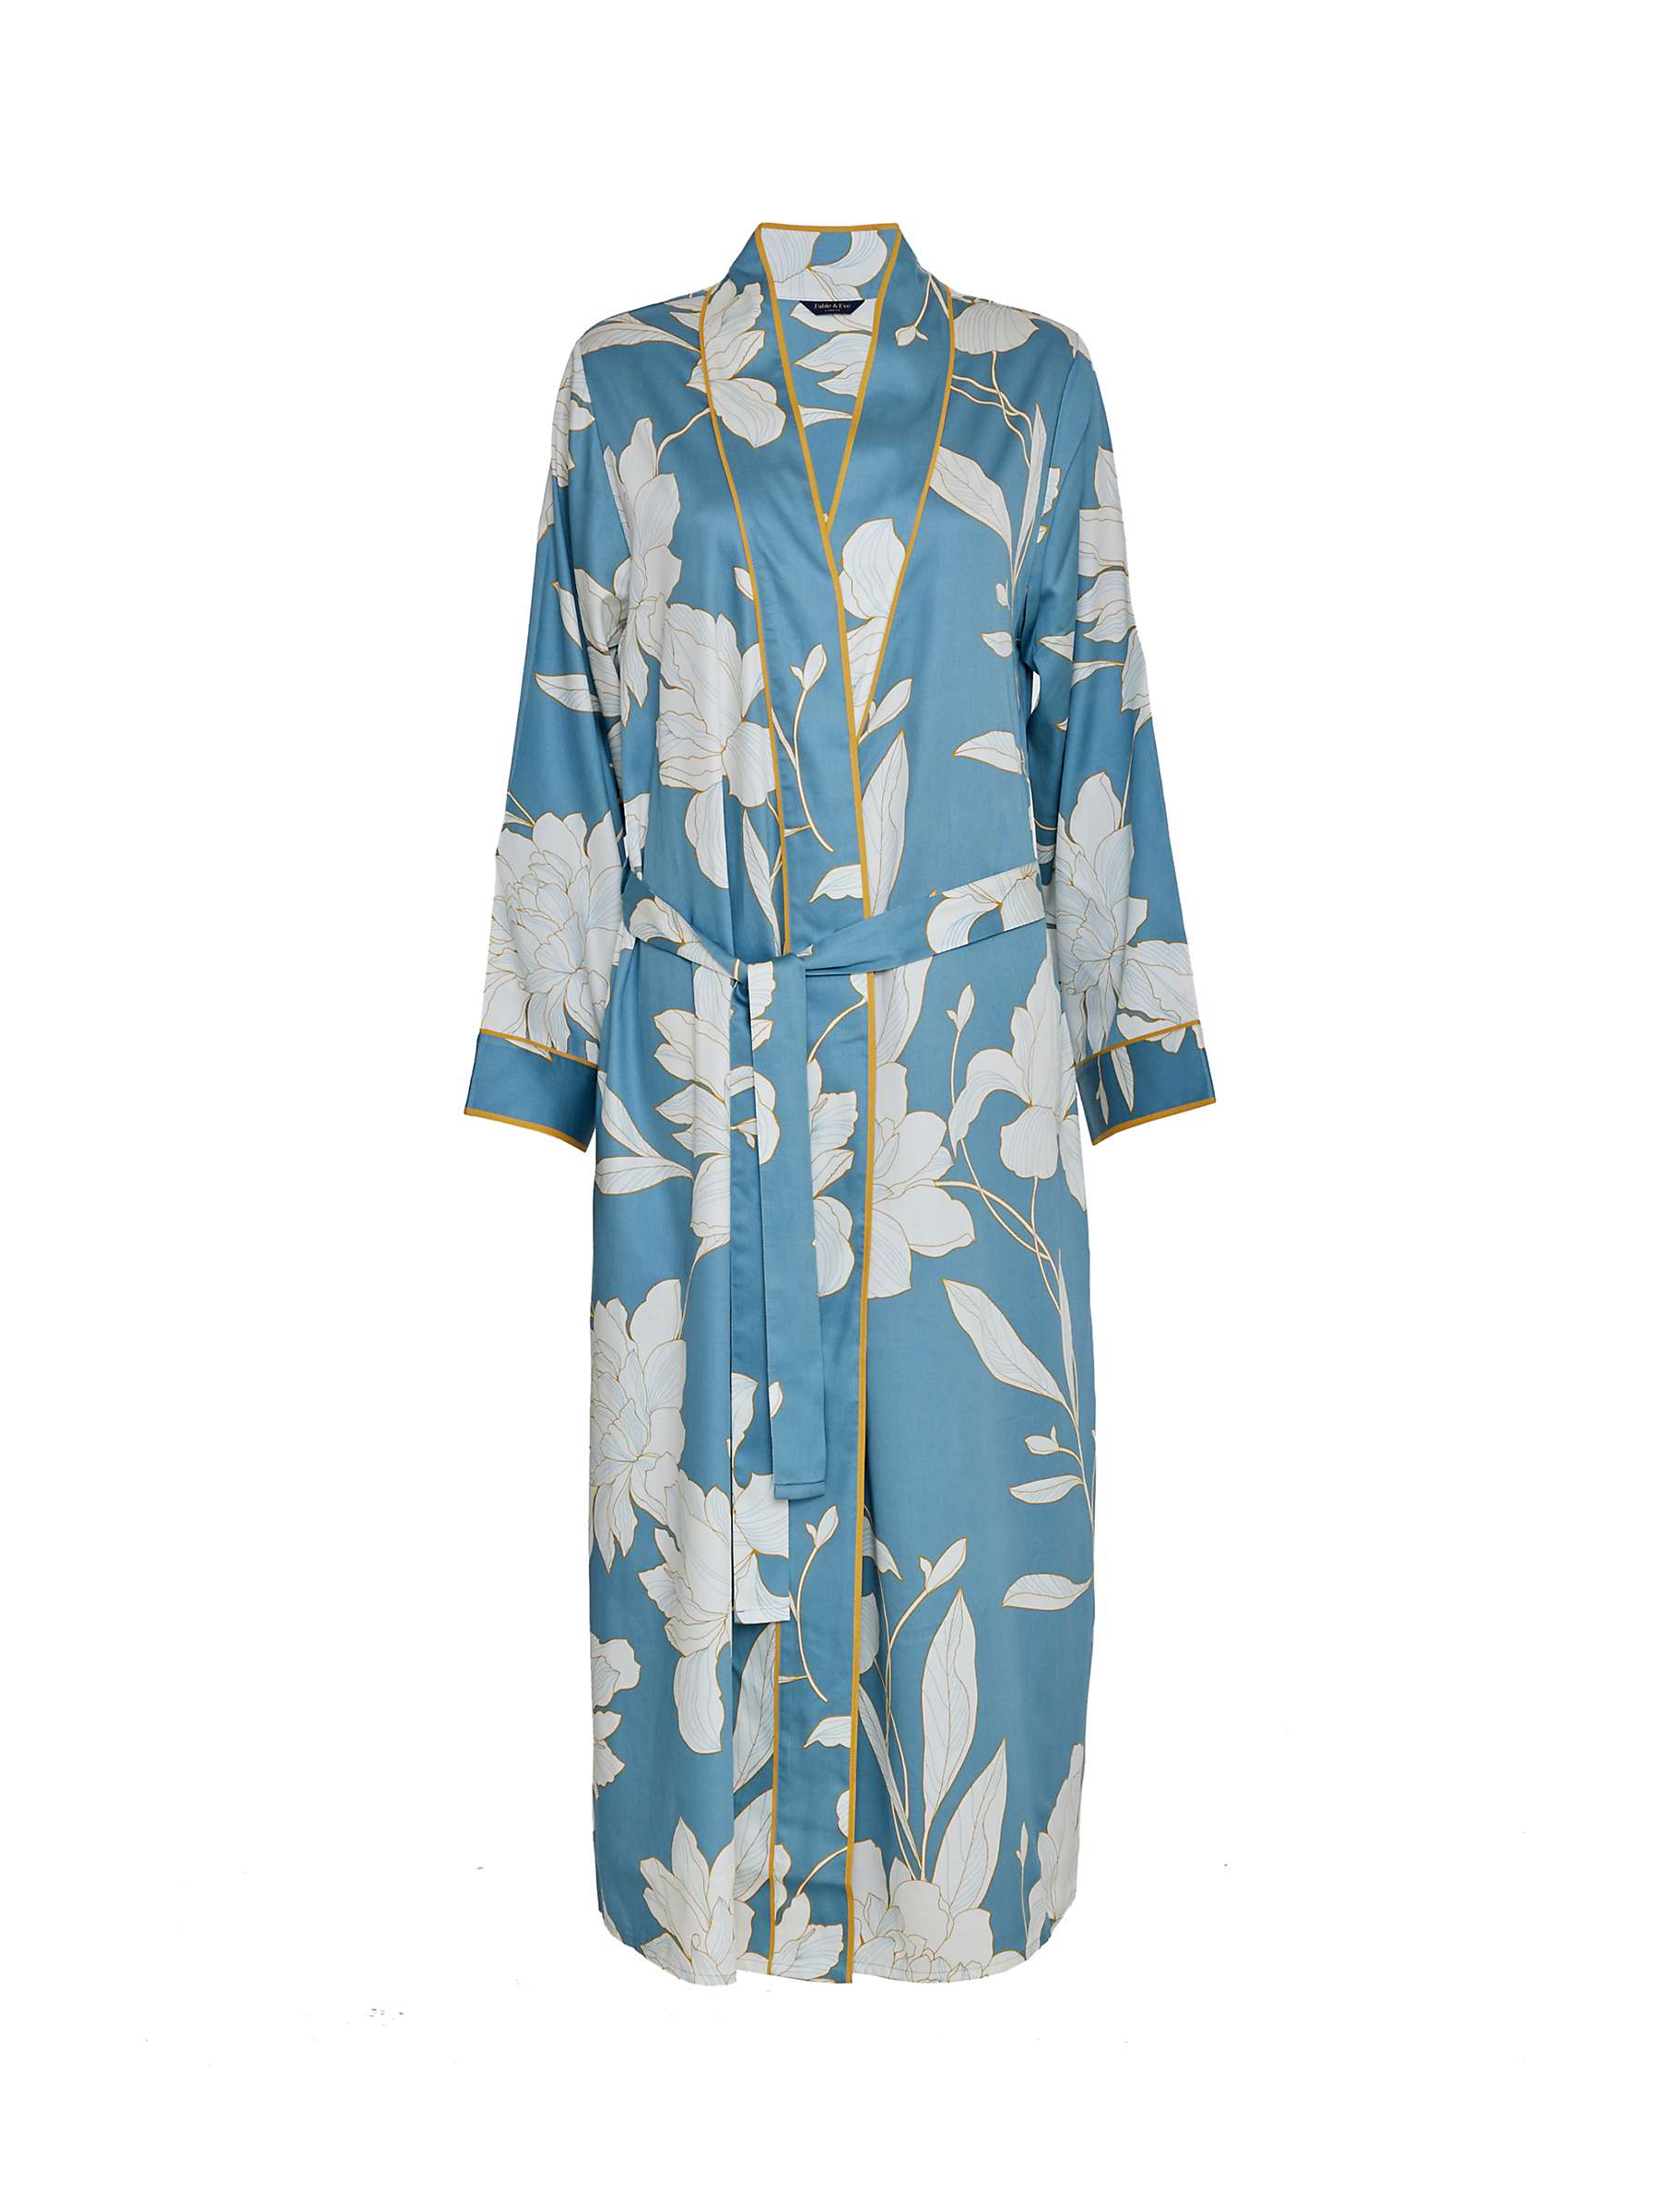 Buy Fable & Eve Greenwich Floral Dressing Gown, Cerulean Blue Online at johnlewis.com